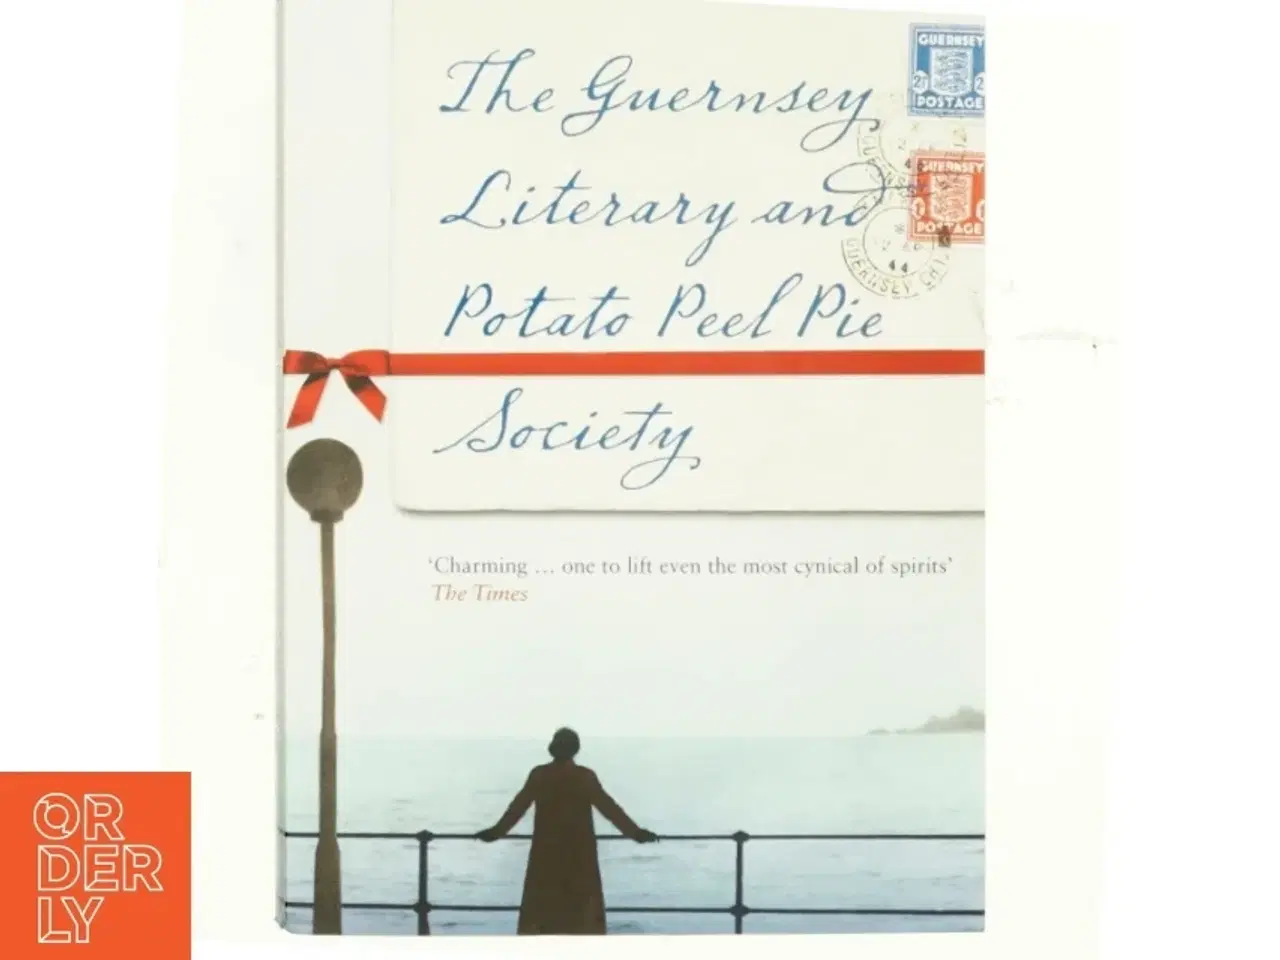 Billede 1 - The Guernsey literary and potato peel pie society af Mary Ann Shaffer (Bog)